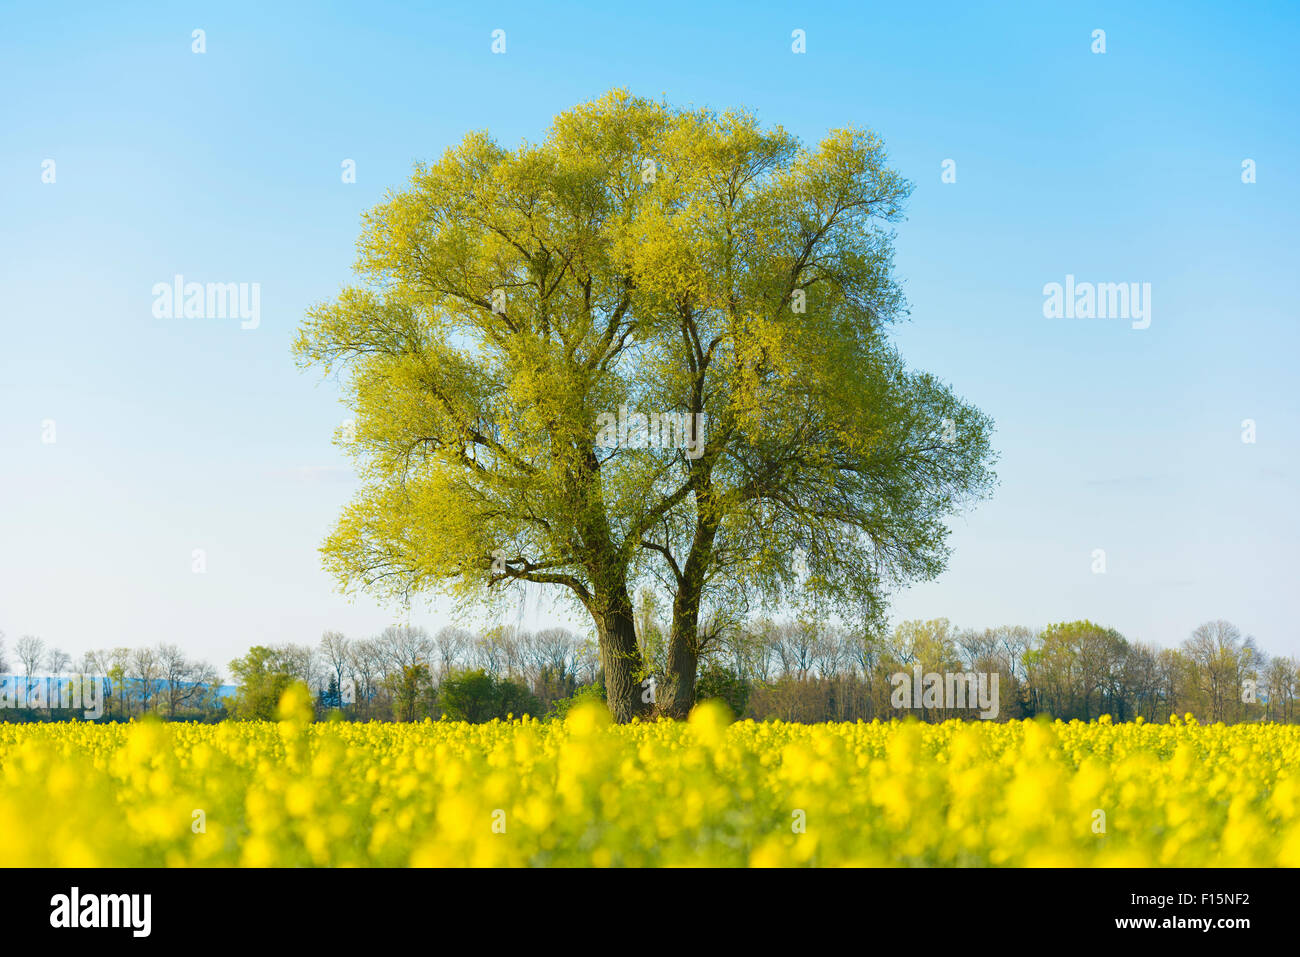 Tree and Blooming Canola Field in Early Spring, Kuehkopf-Knoblochsaue Nature Reserve, Hesse, Germany Stock Photo